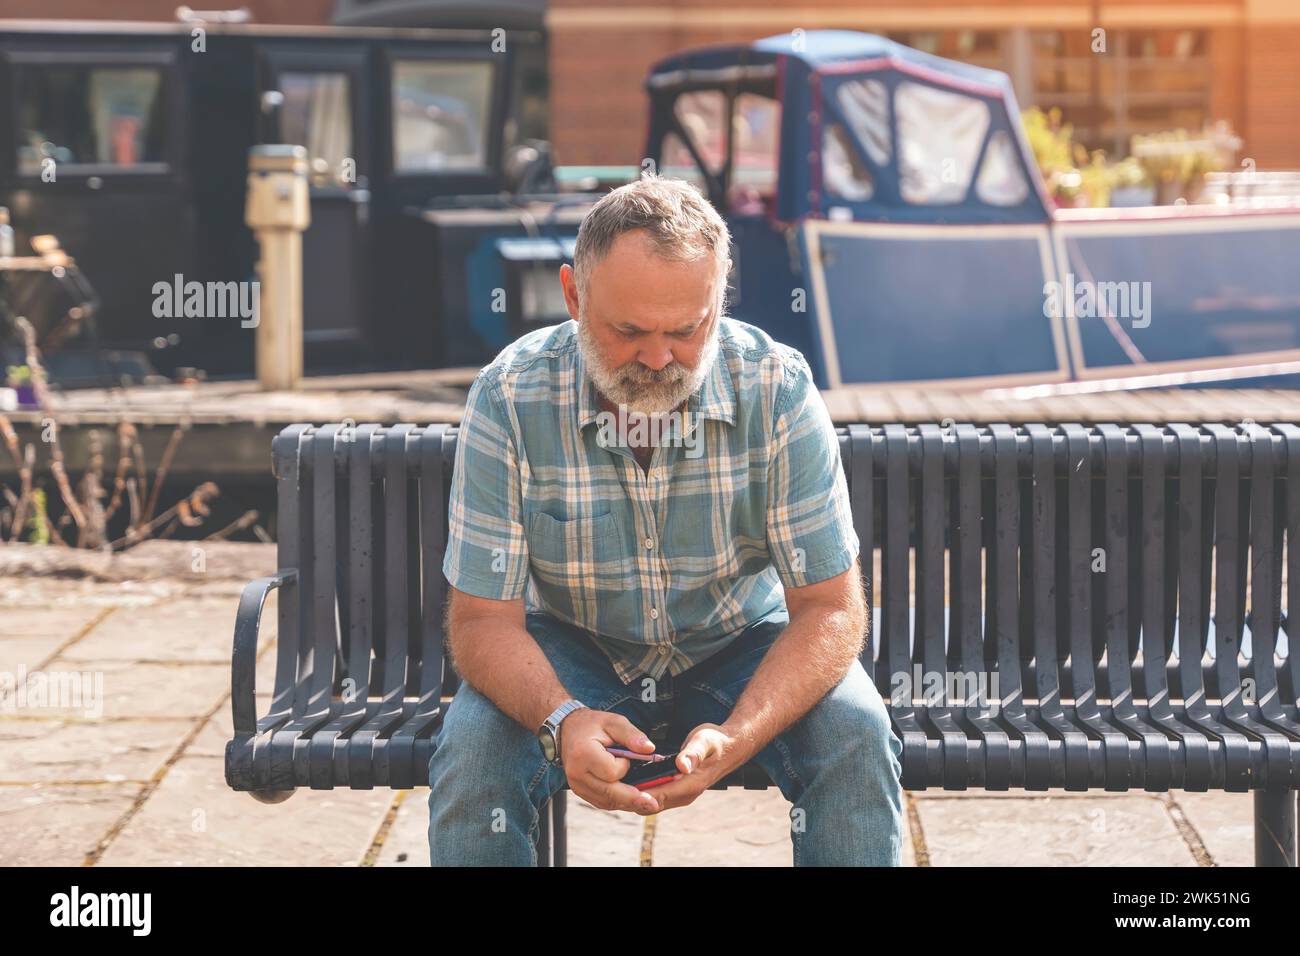 Mature man sitting on a bench and using a smartphone Stock Photo